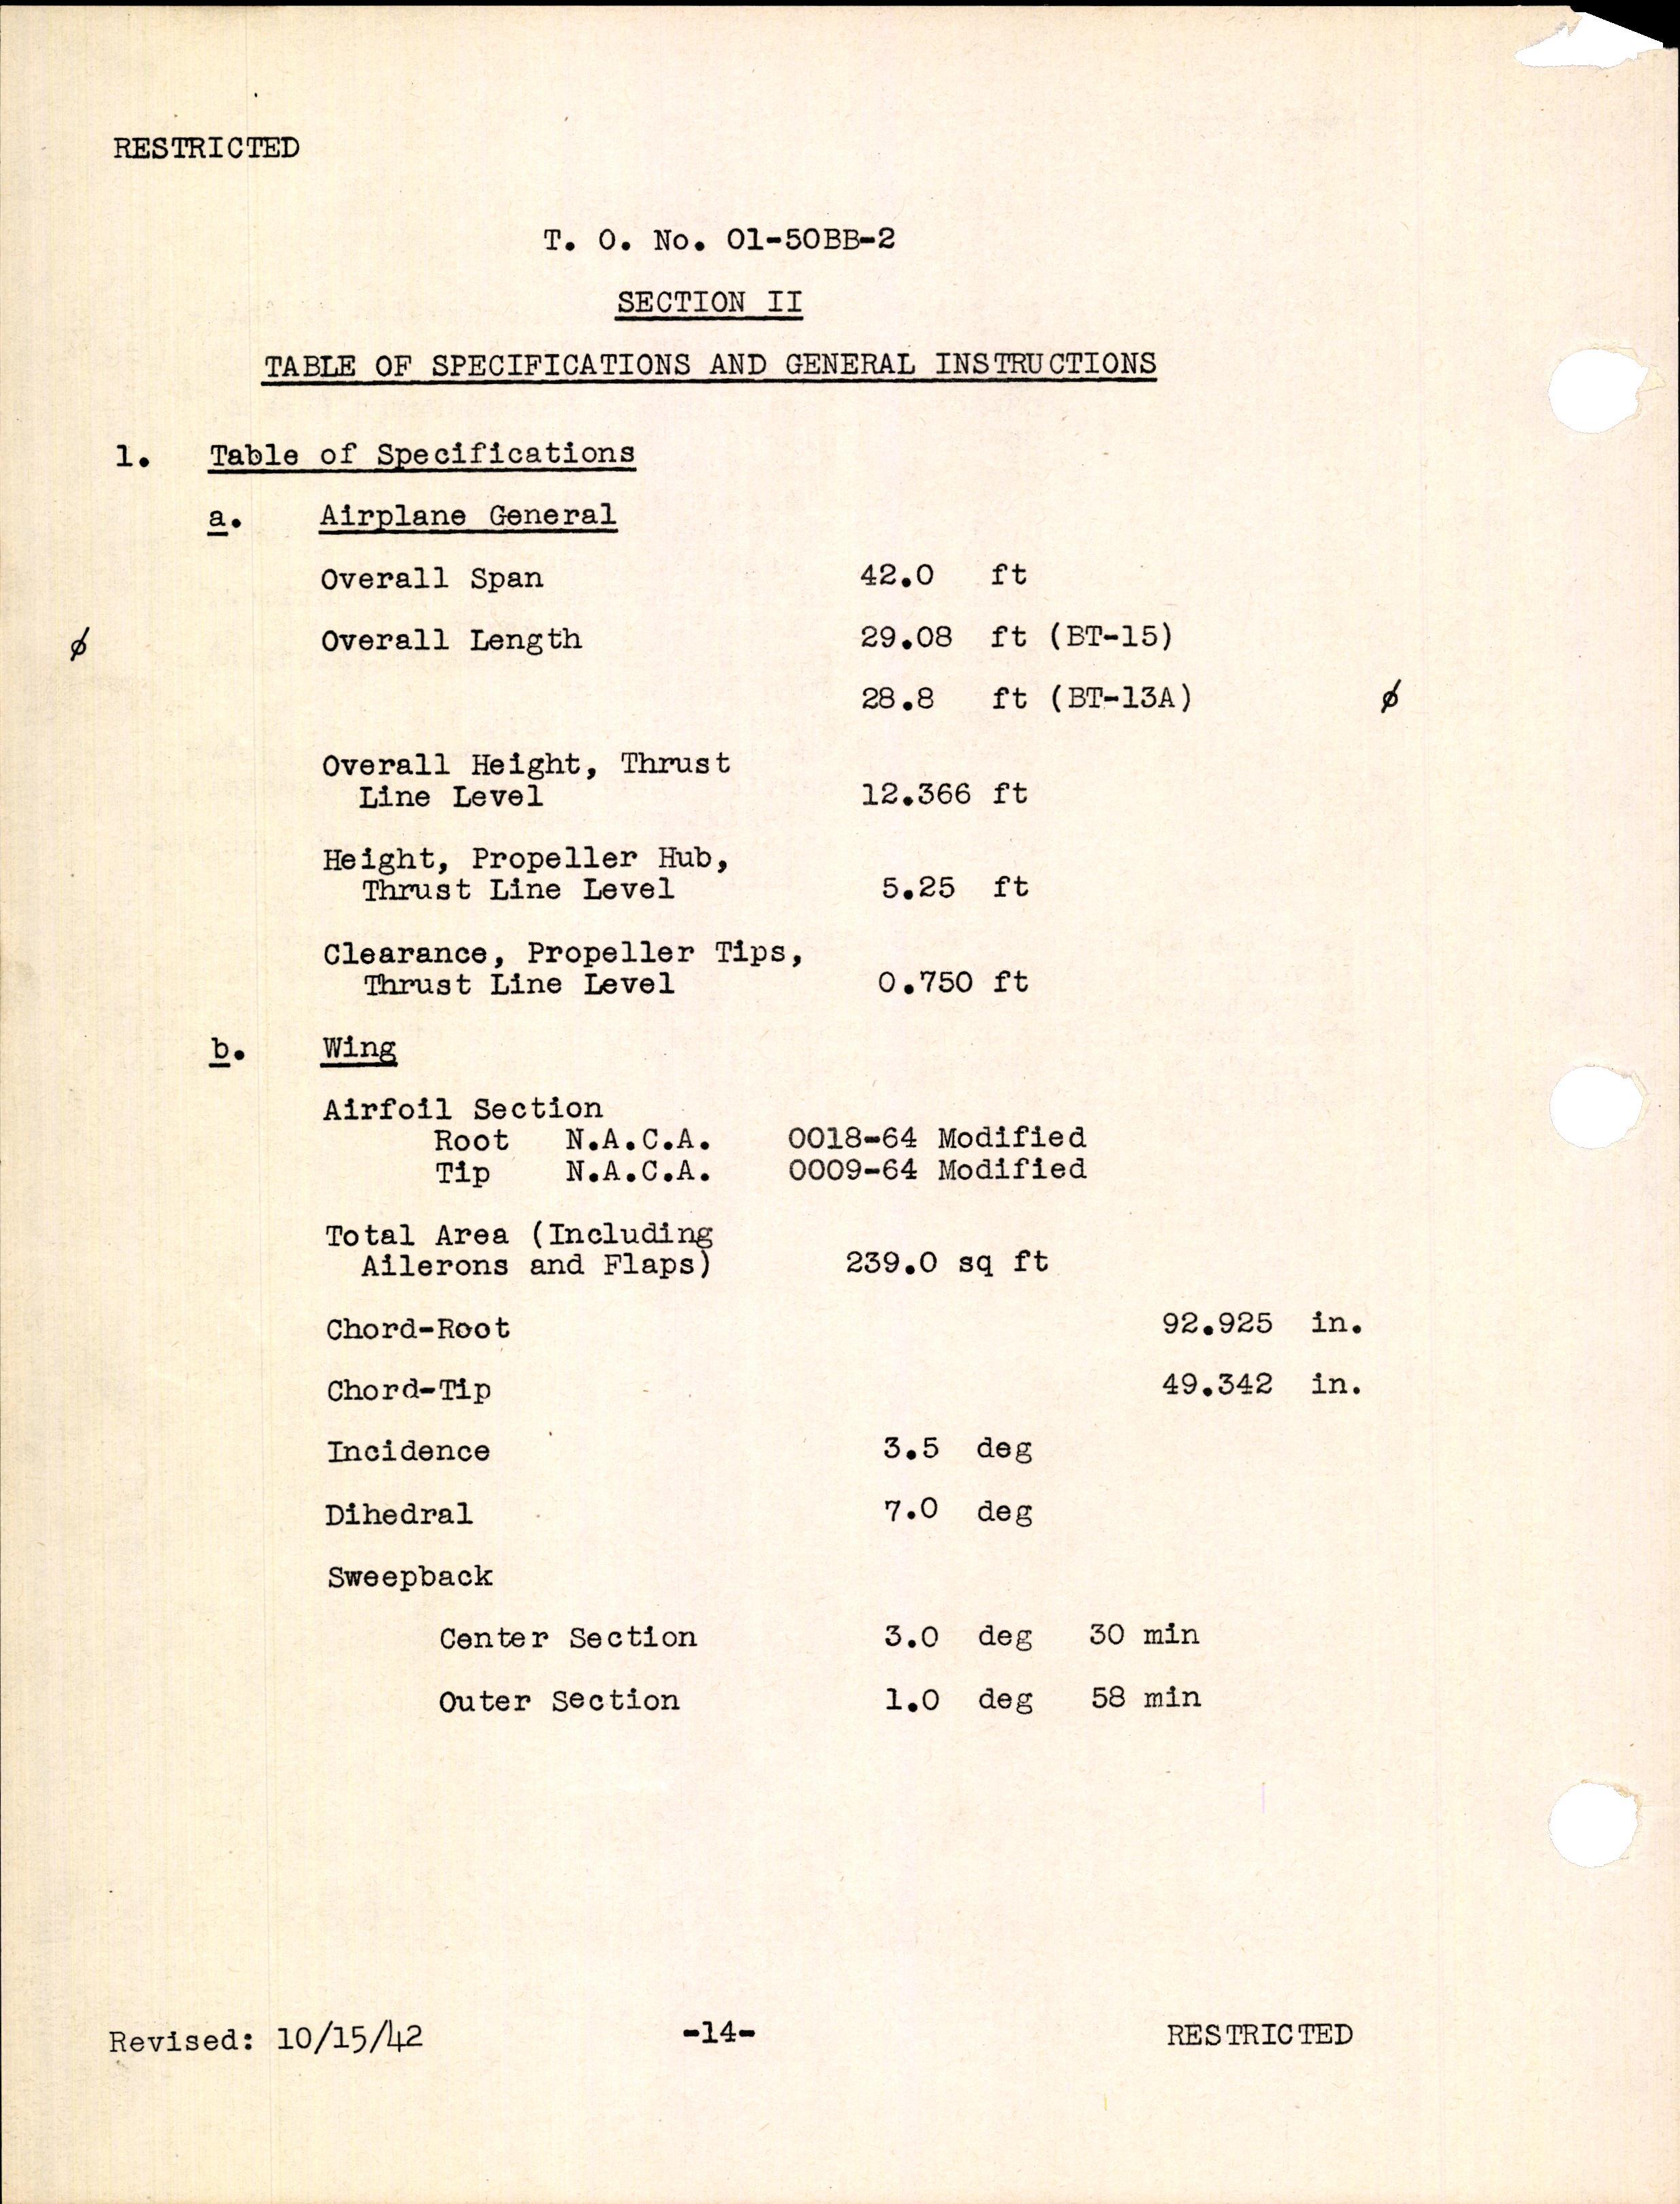 Sample page 18 from AirCorps Library document: Service Instructions for BT-13A and BT-15 and SNV-1